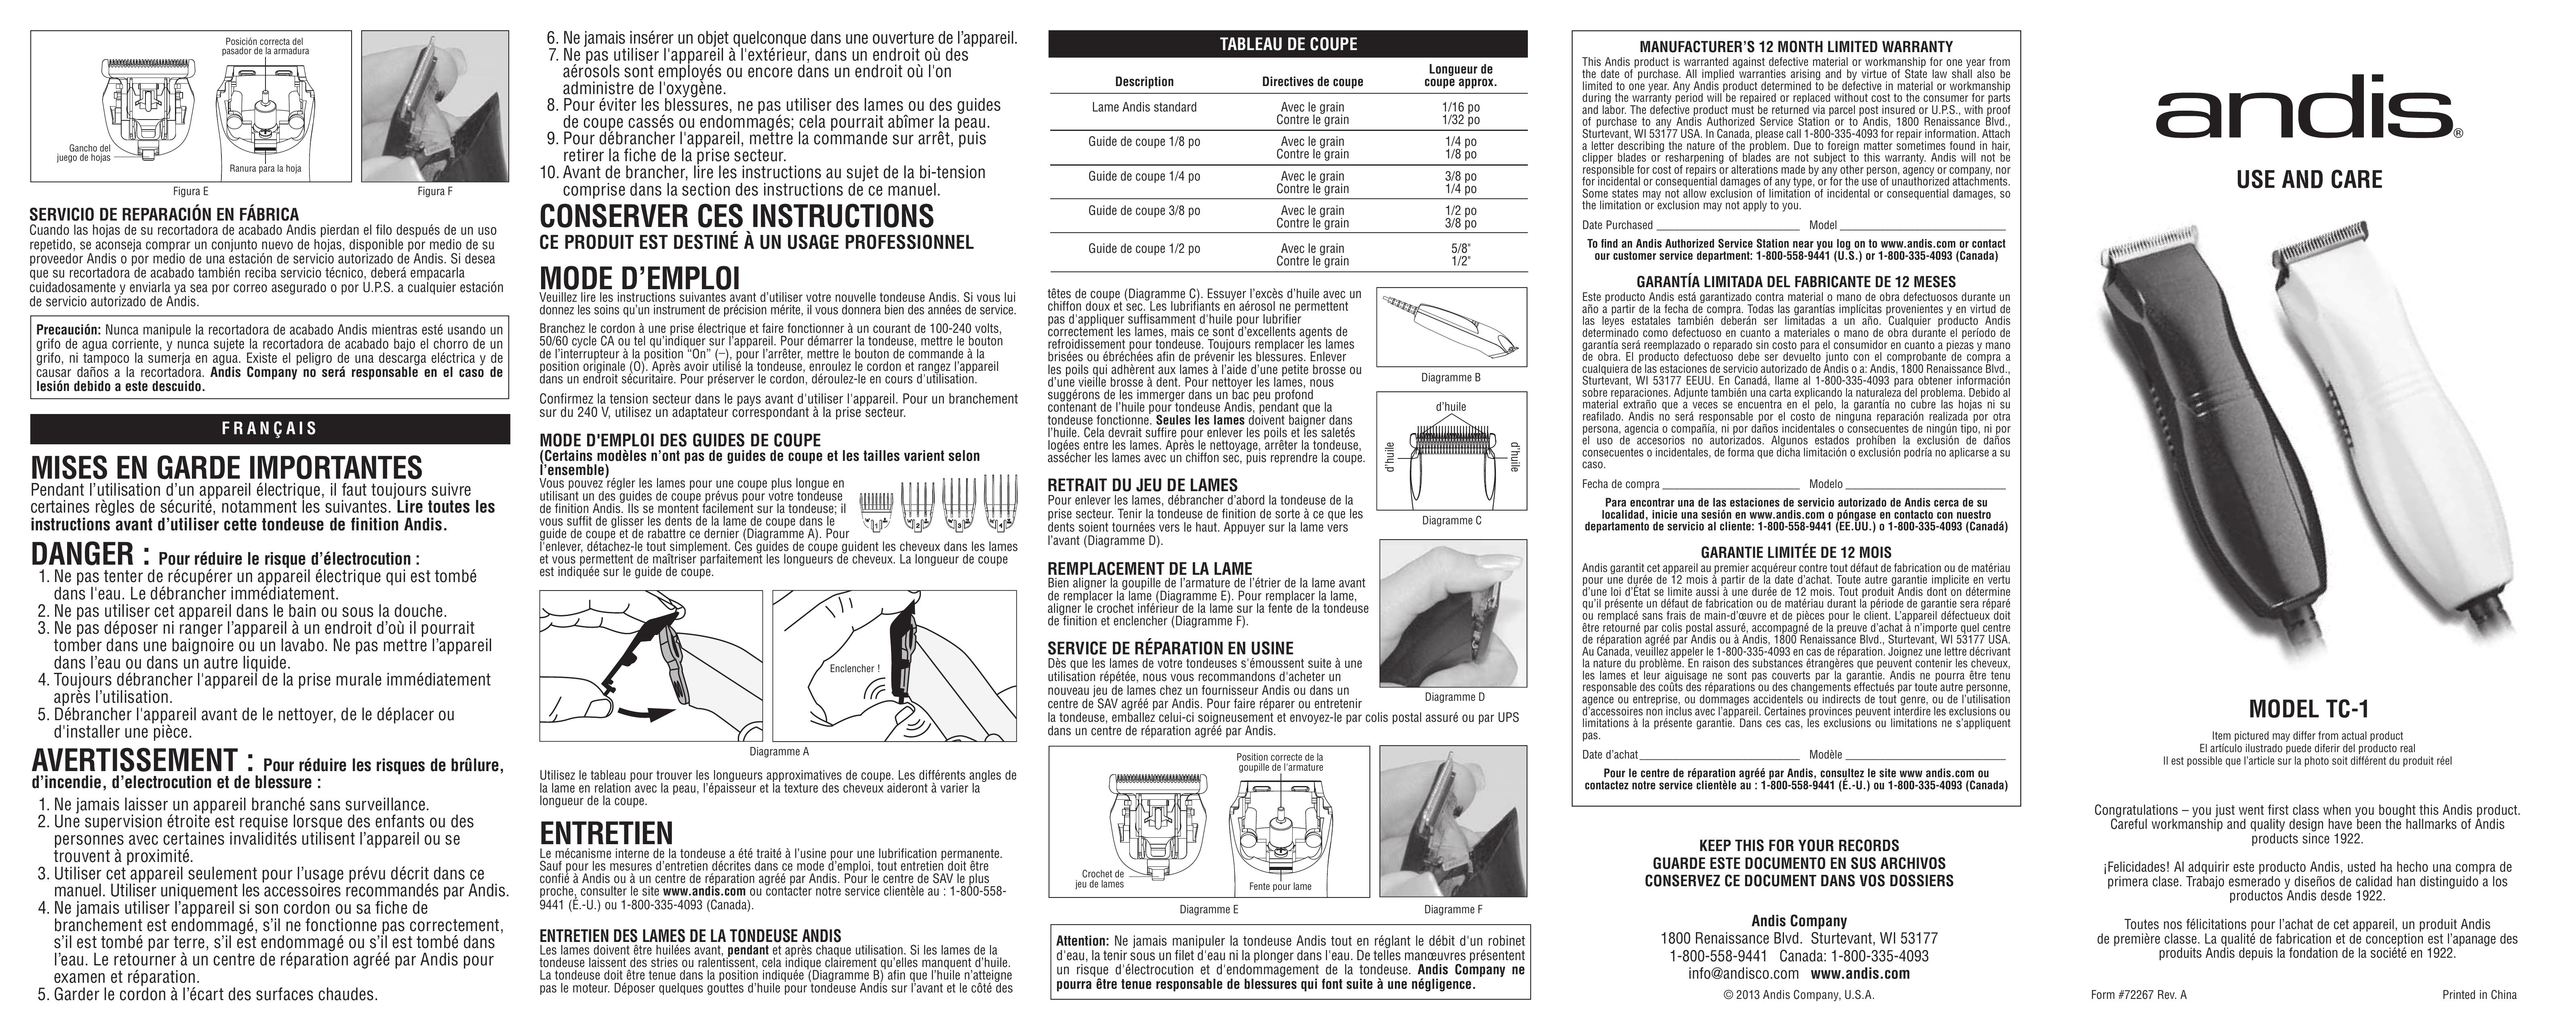 Andis Company TC-1 Electric Shaver User Manual (Page 1)